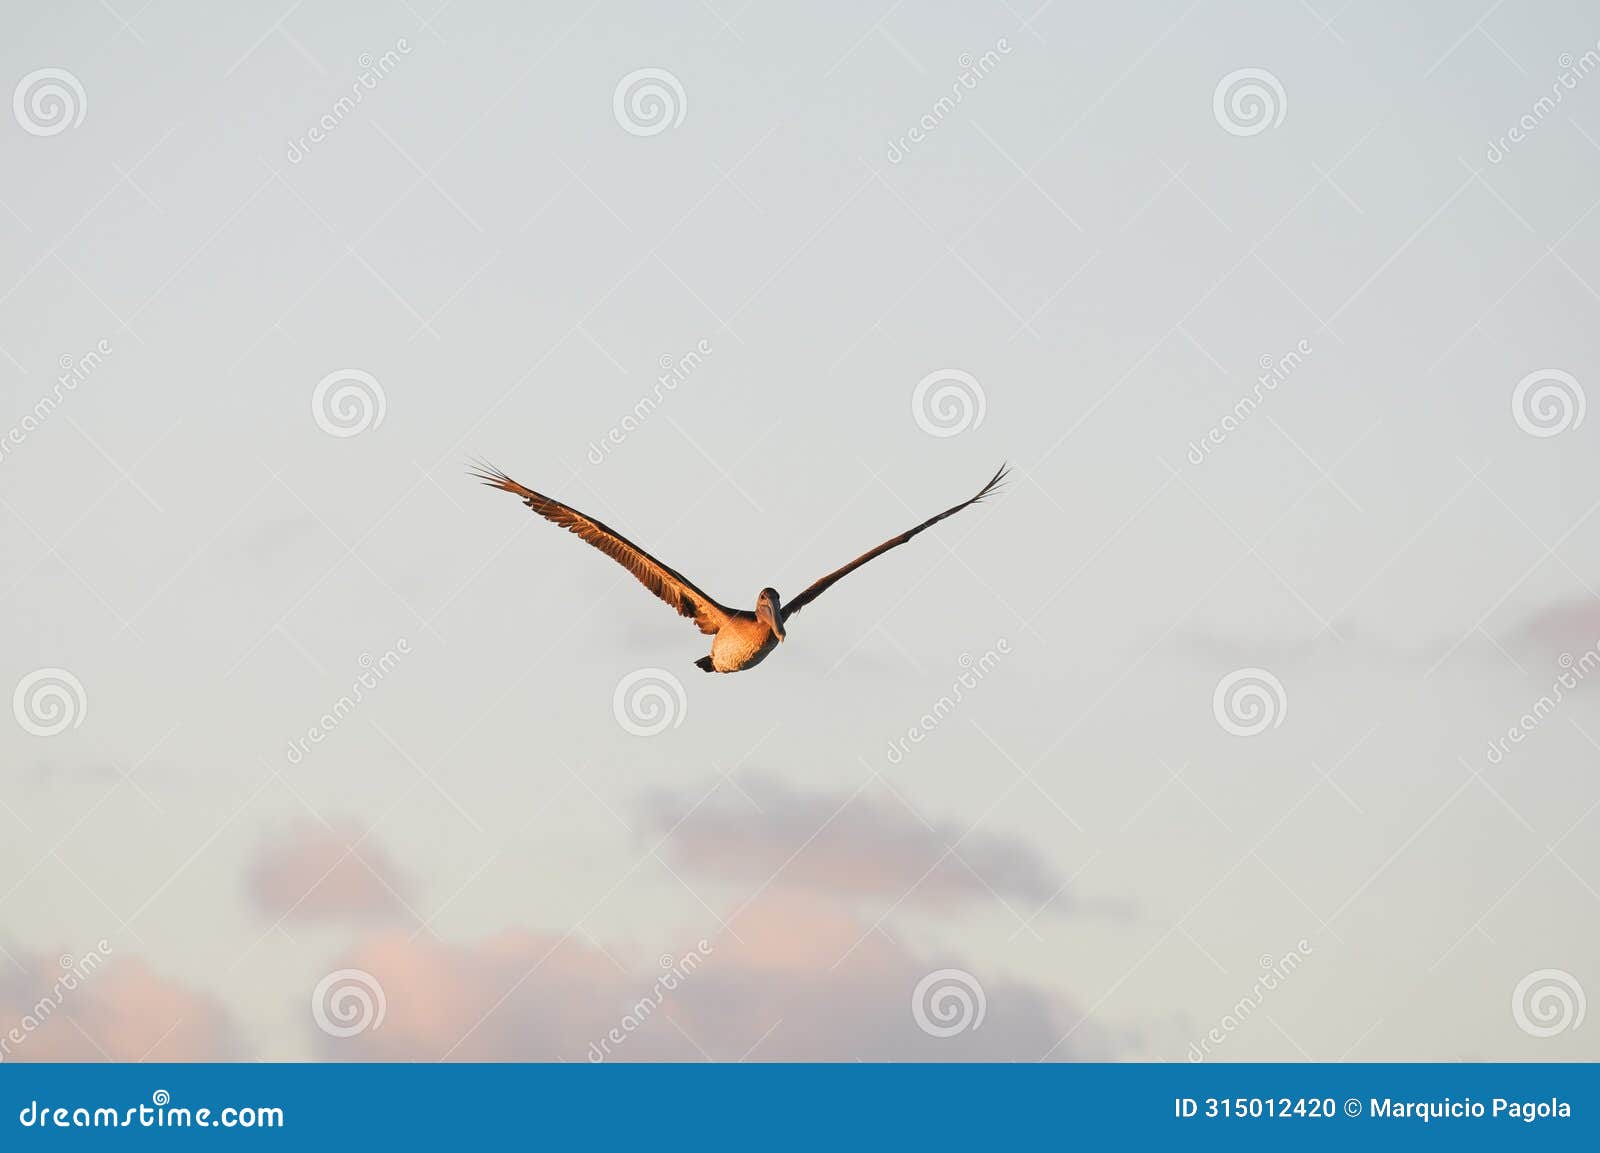 a bird is flying over the ocean with a sailboat in the background freedom air lonelily wild